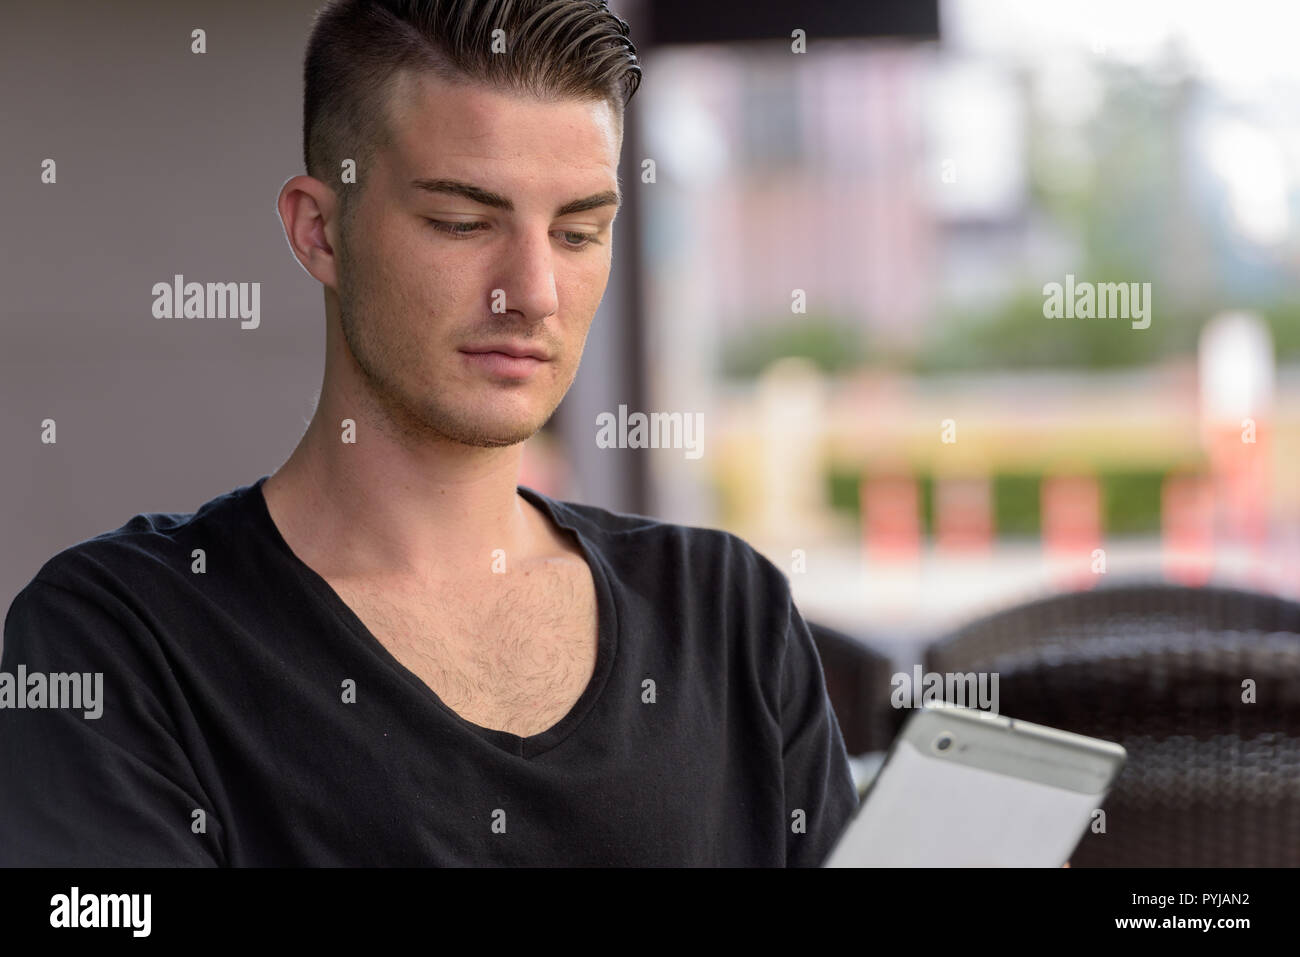 Young man using digital tablet outdoors while sitting Stock Photo